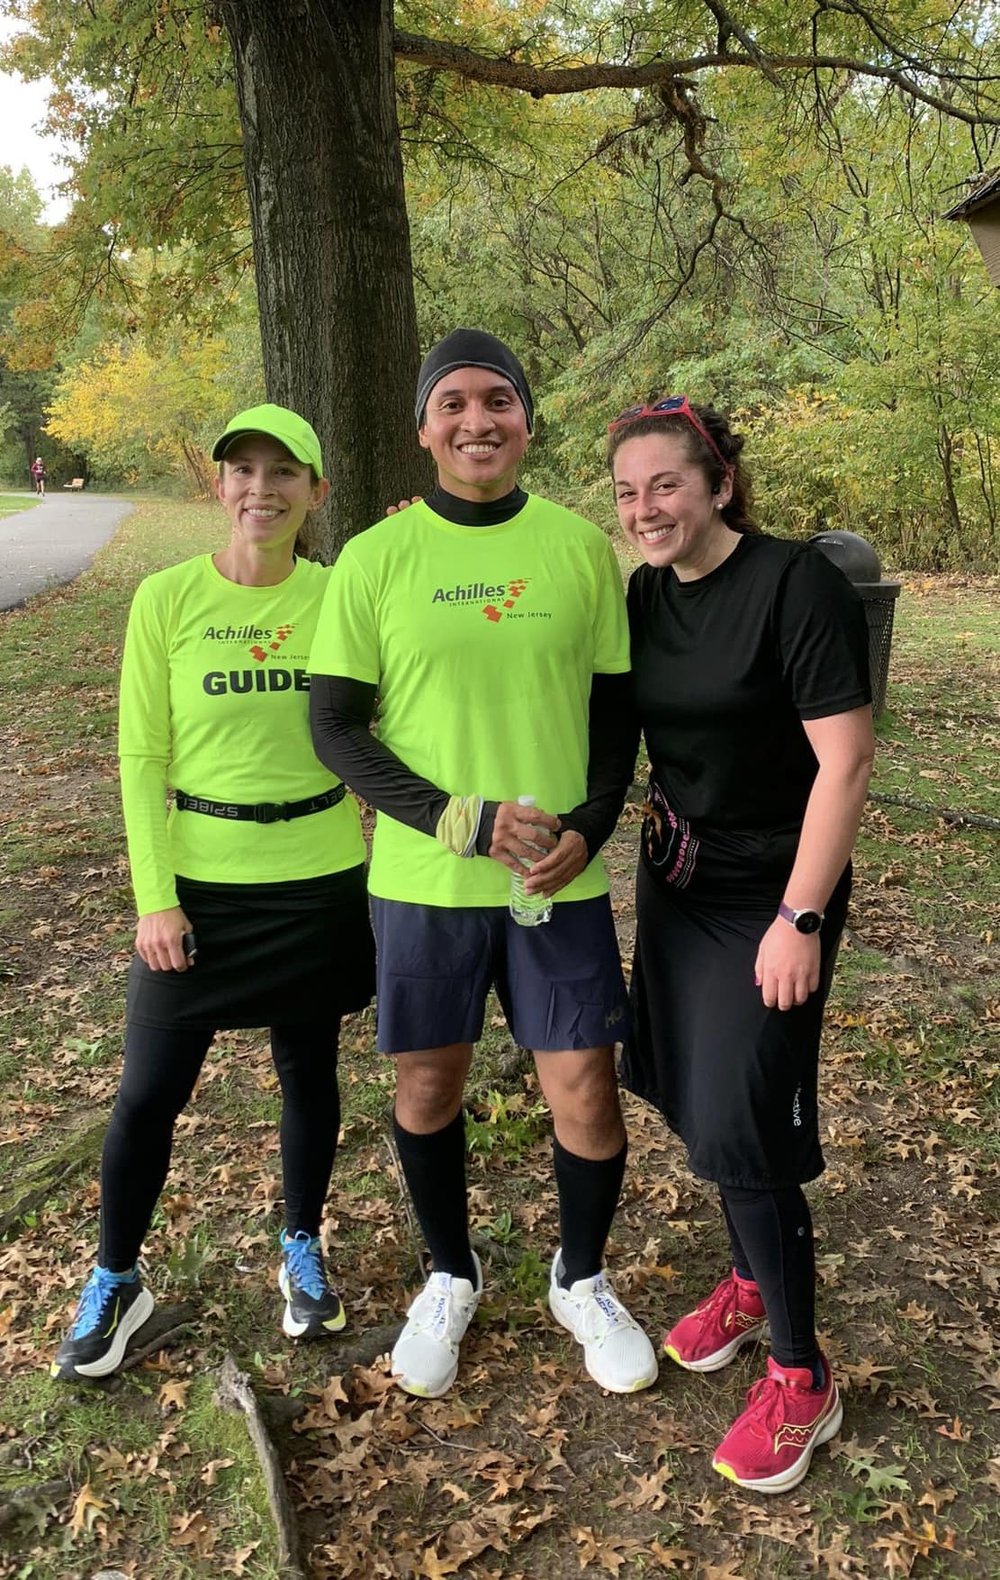  Rolando smiling and posing in between two Achilles New Jersey guides  